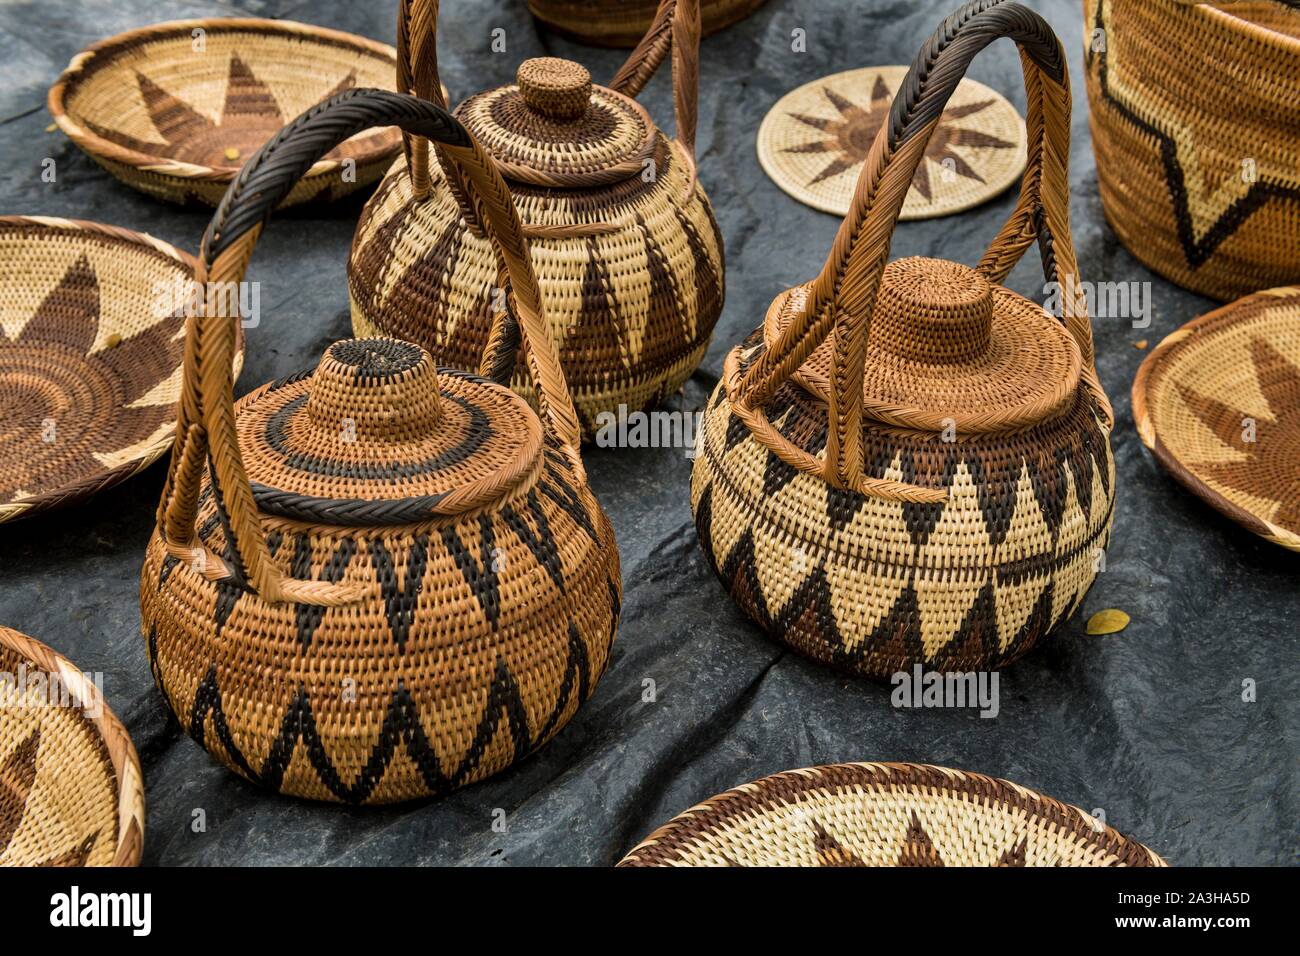 Papua-New-Guinea, National Capital District, Port Moresby, Waigani district, Port moresby Theatre, Monthly craft market, paintings and crafts for sell Stock Photo